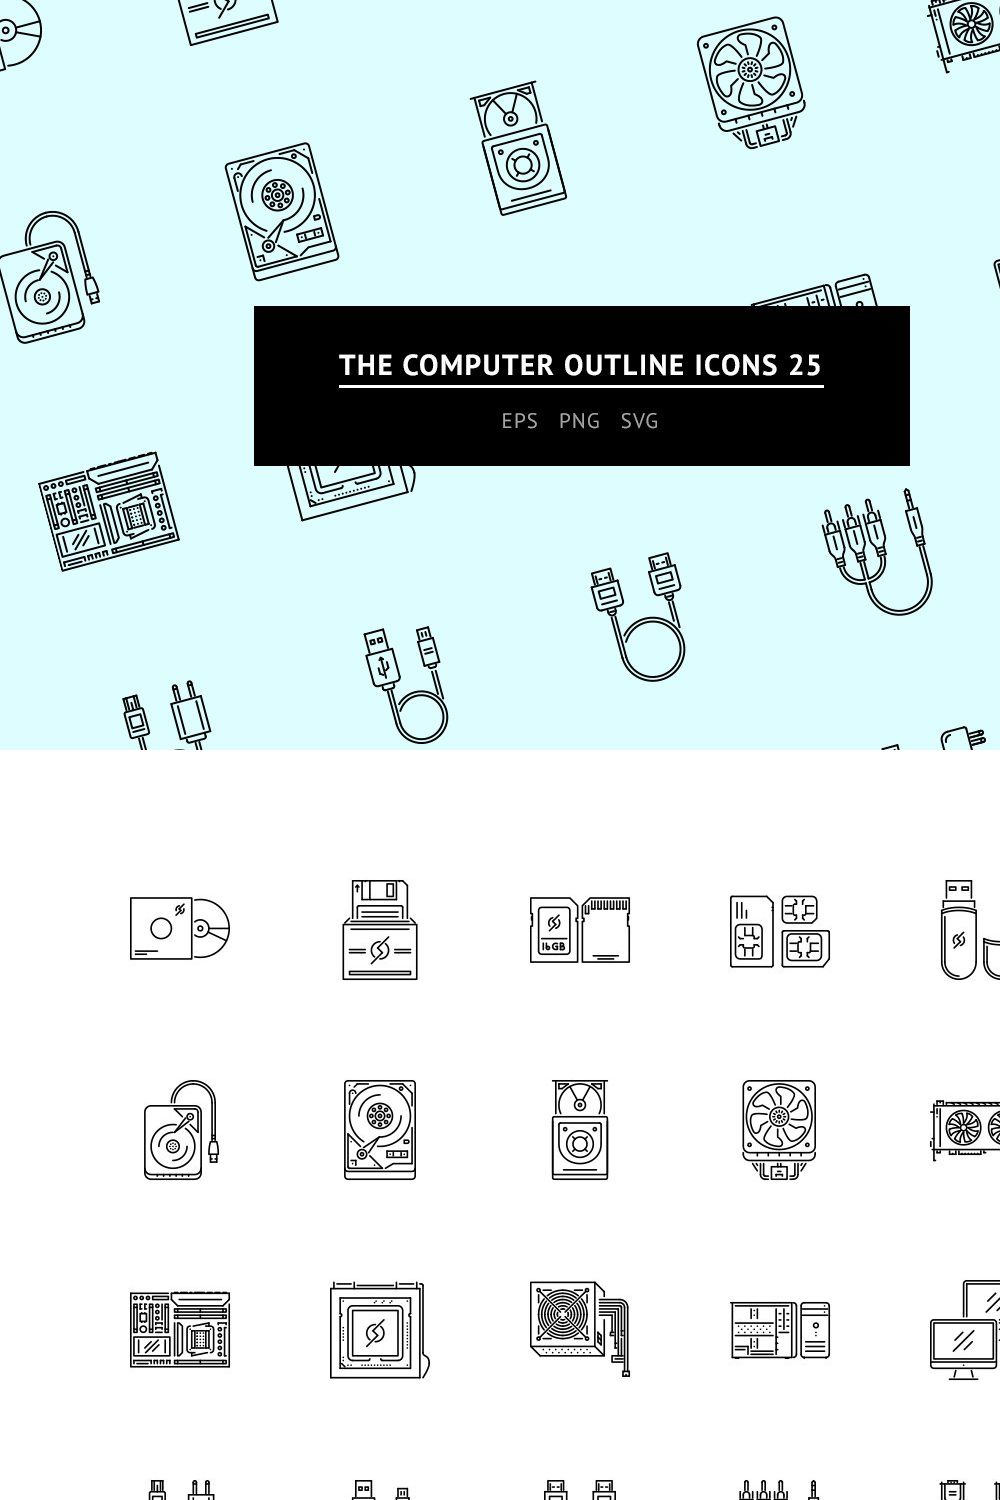 The Computer Outline Icons 25 pinterest preview image.